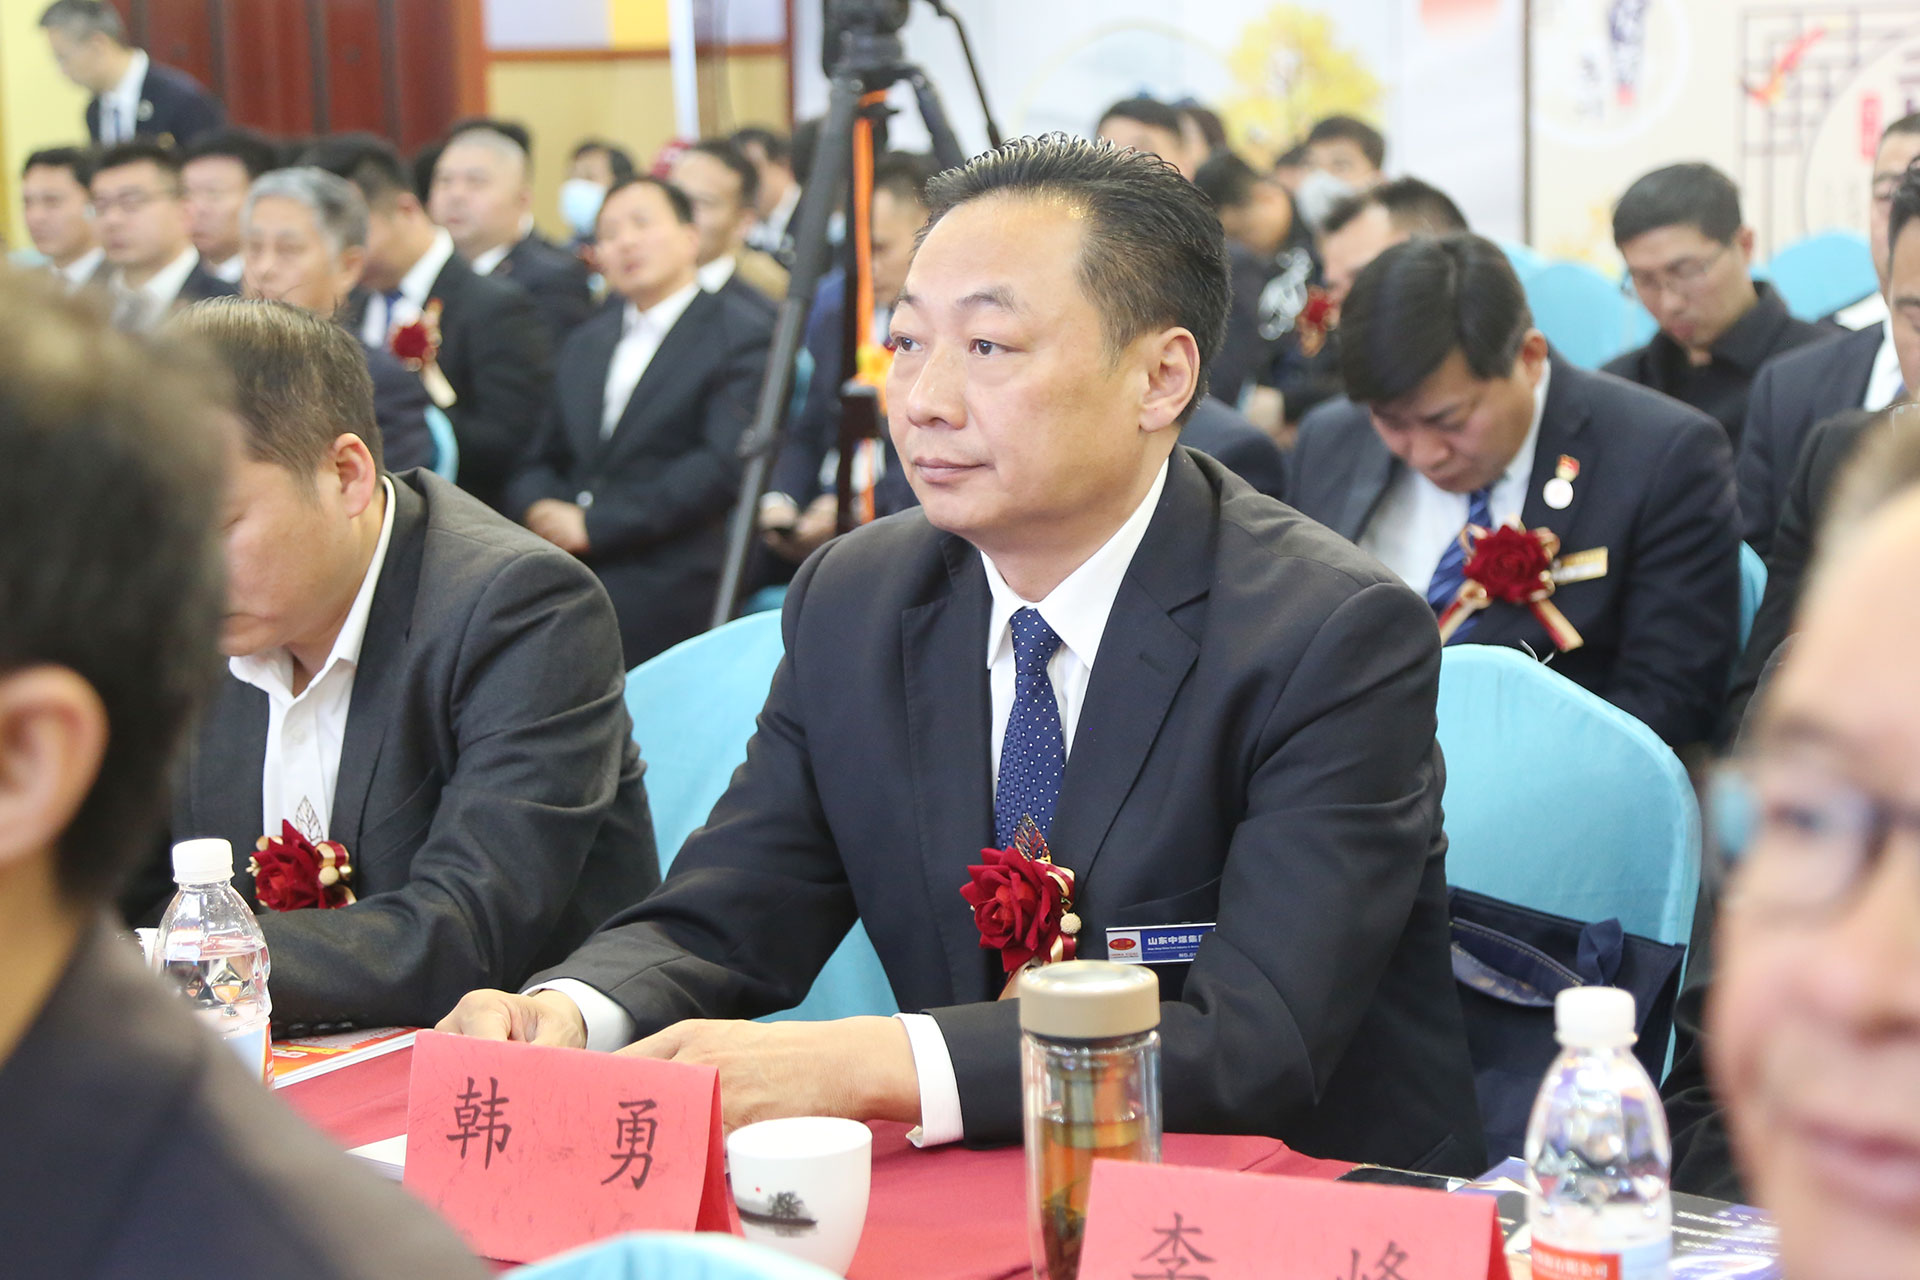 China Coal Group Participate In The 3rd First Member Congress Of Jining Weishan Lake Development Promotion Association